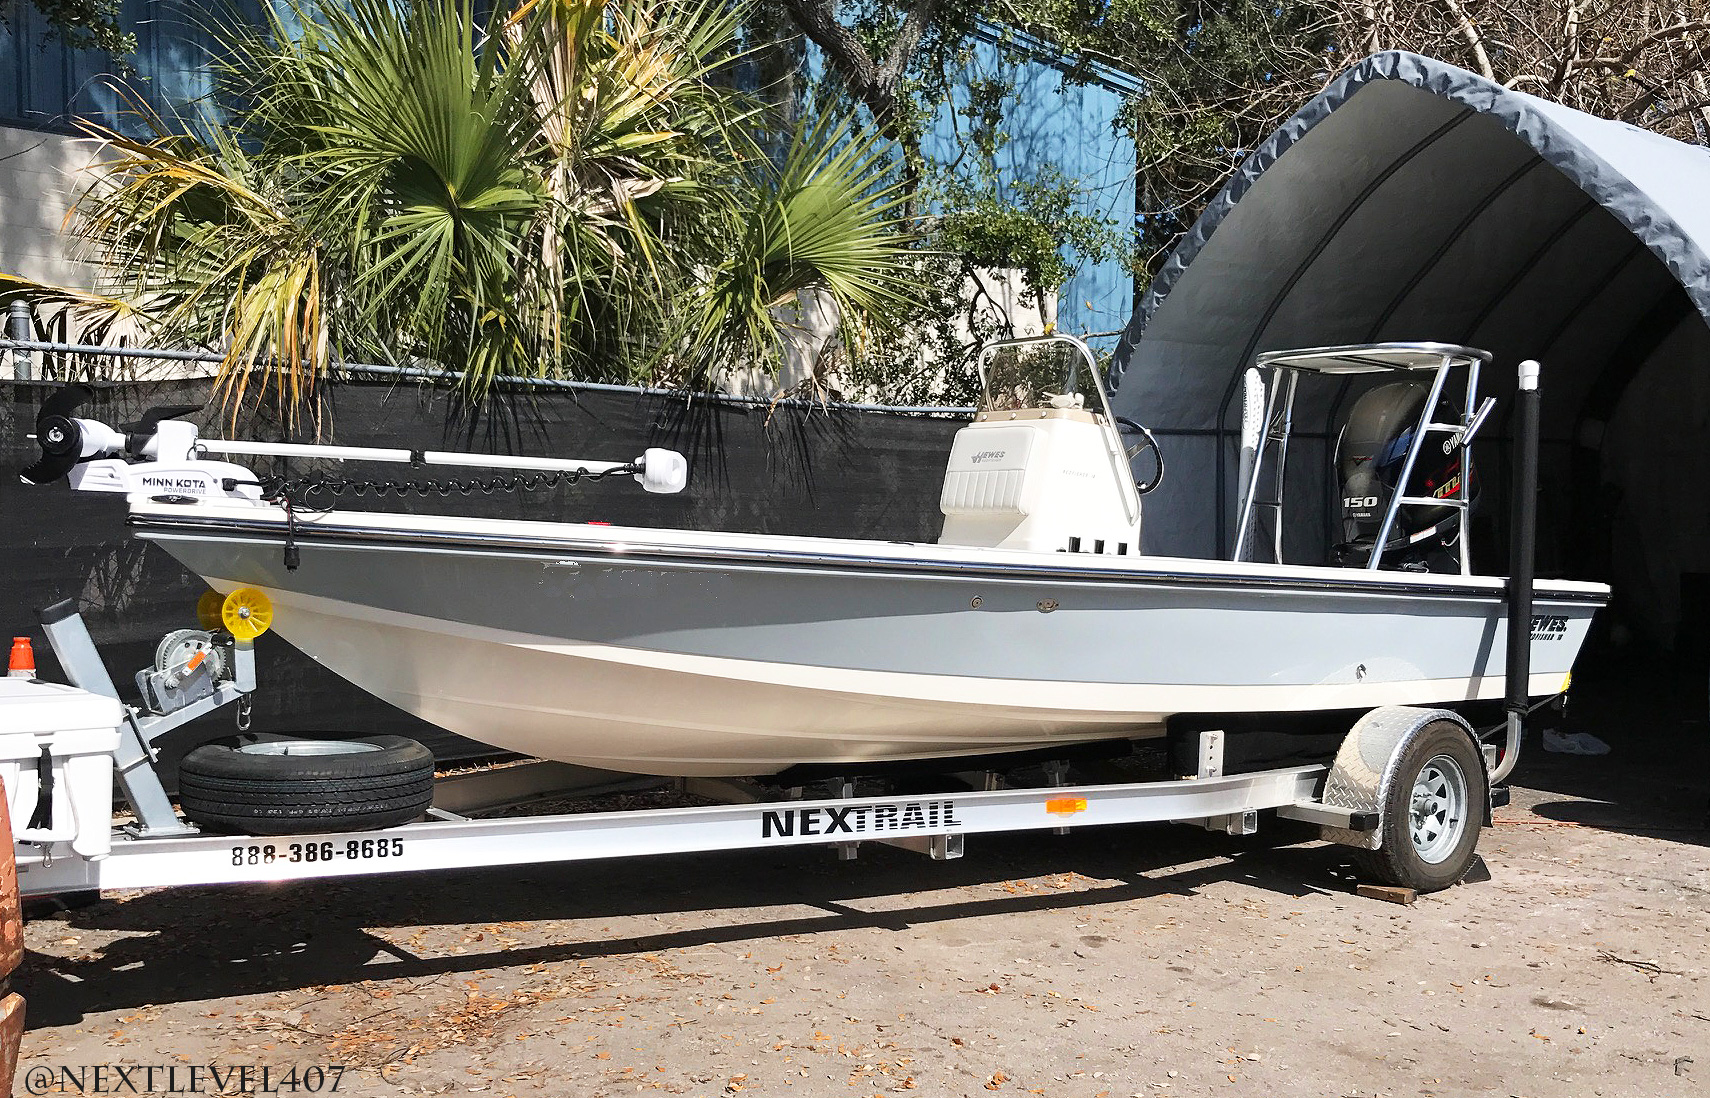 Hewes-flats-boat-with-SeaDek-Installed